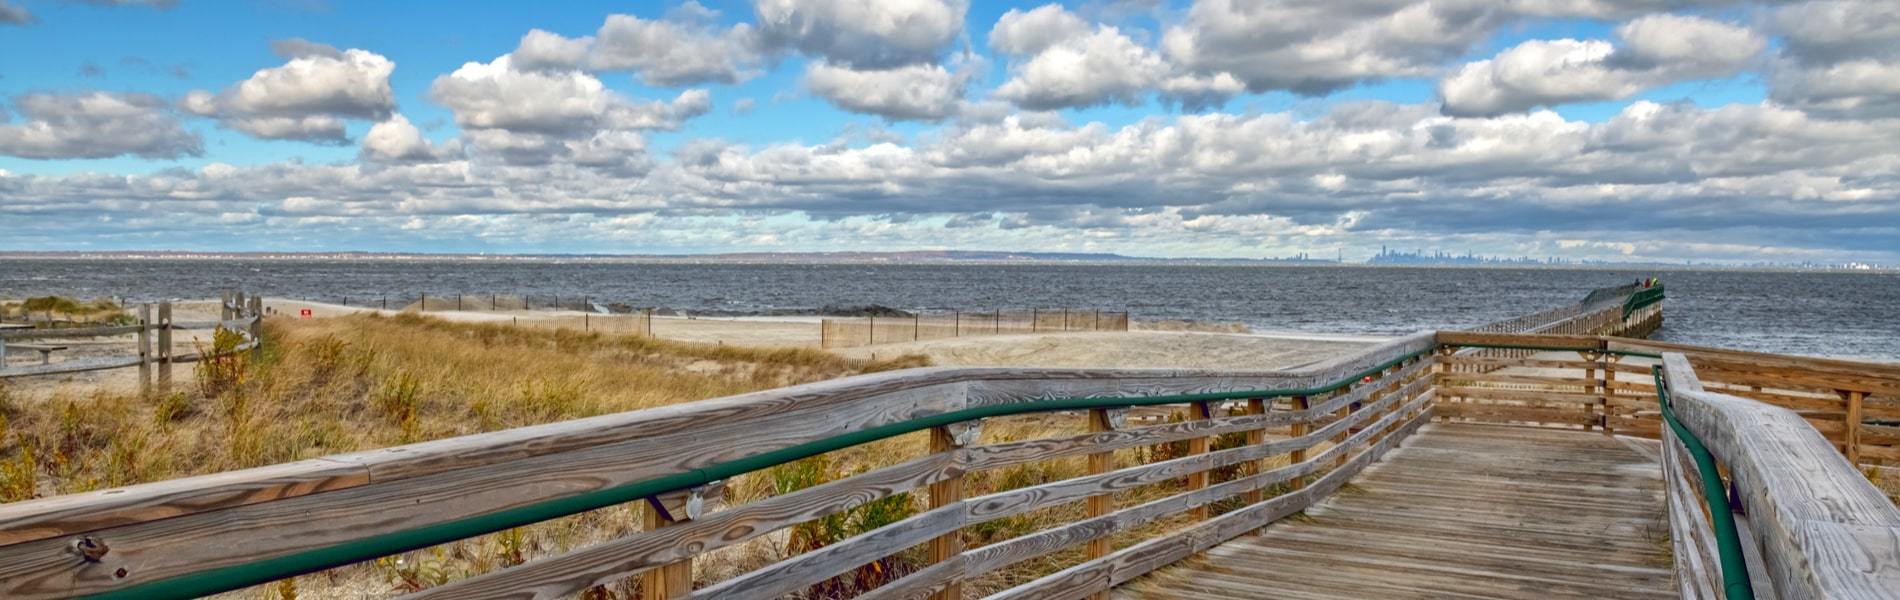 wooden fishing pier in Bayshore Waterfront Park in Monmouth County New Jersey